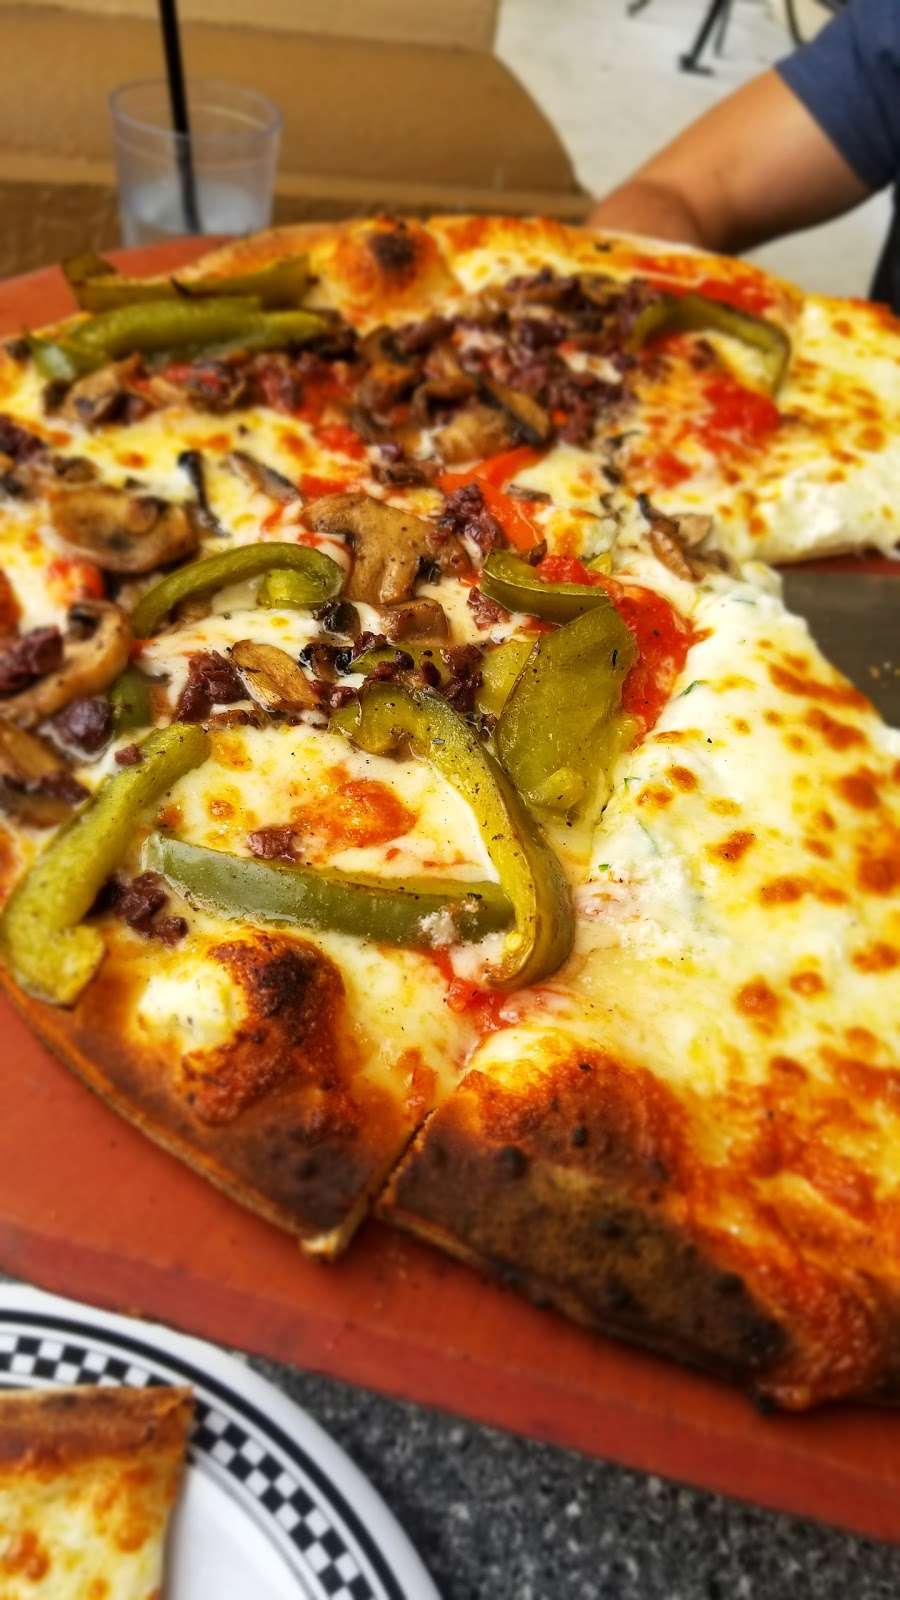 Anthonys Coal Fired Pizza | 9521 Westview Dr, Coral Springs, FL 33076 | Phone: (954) 340-2625